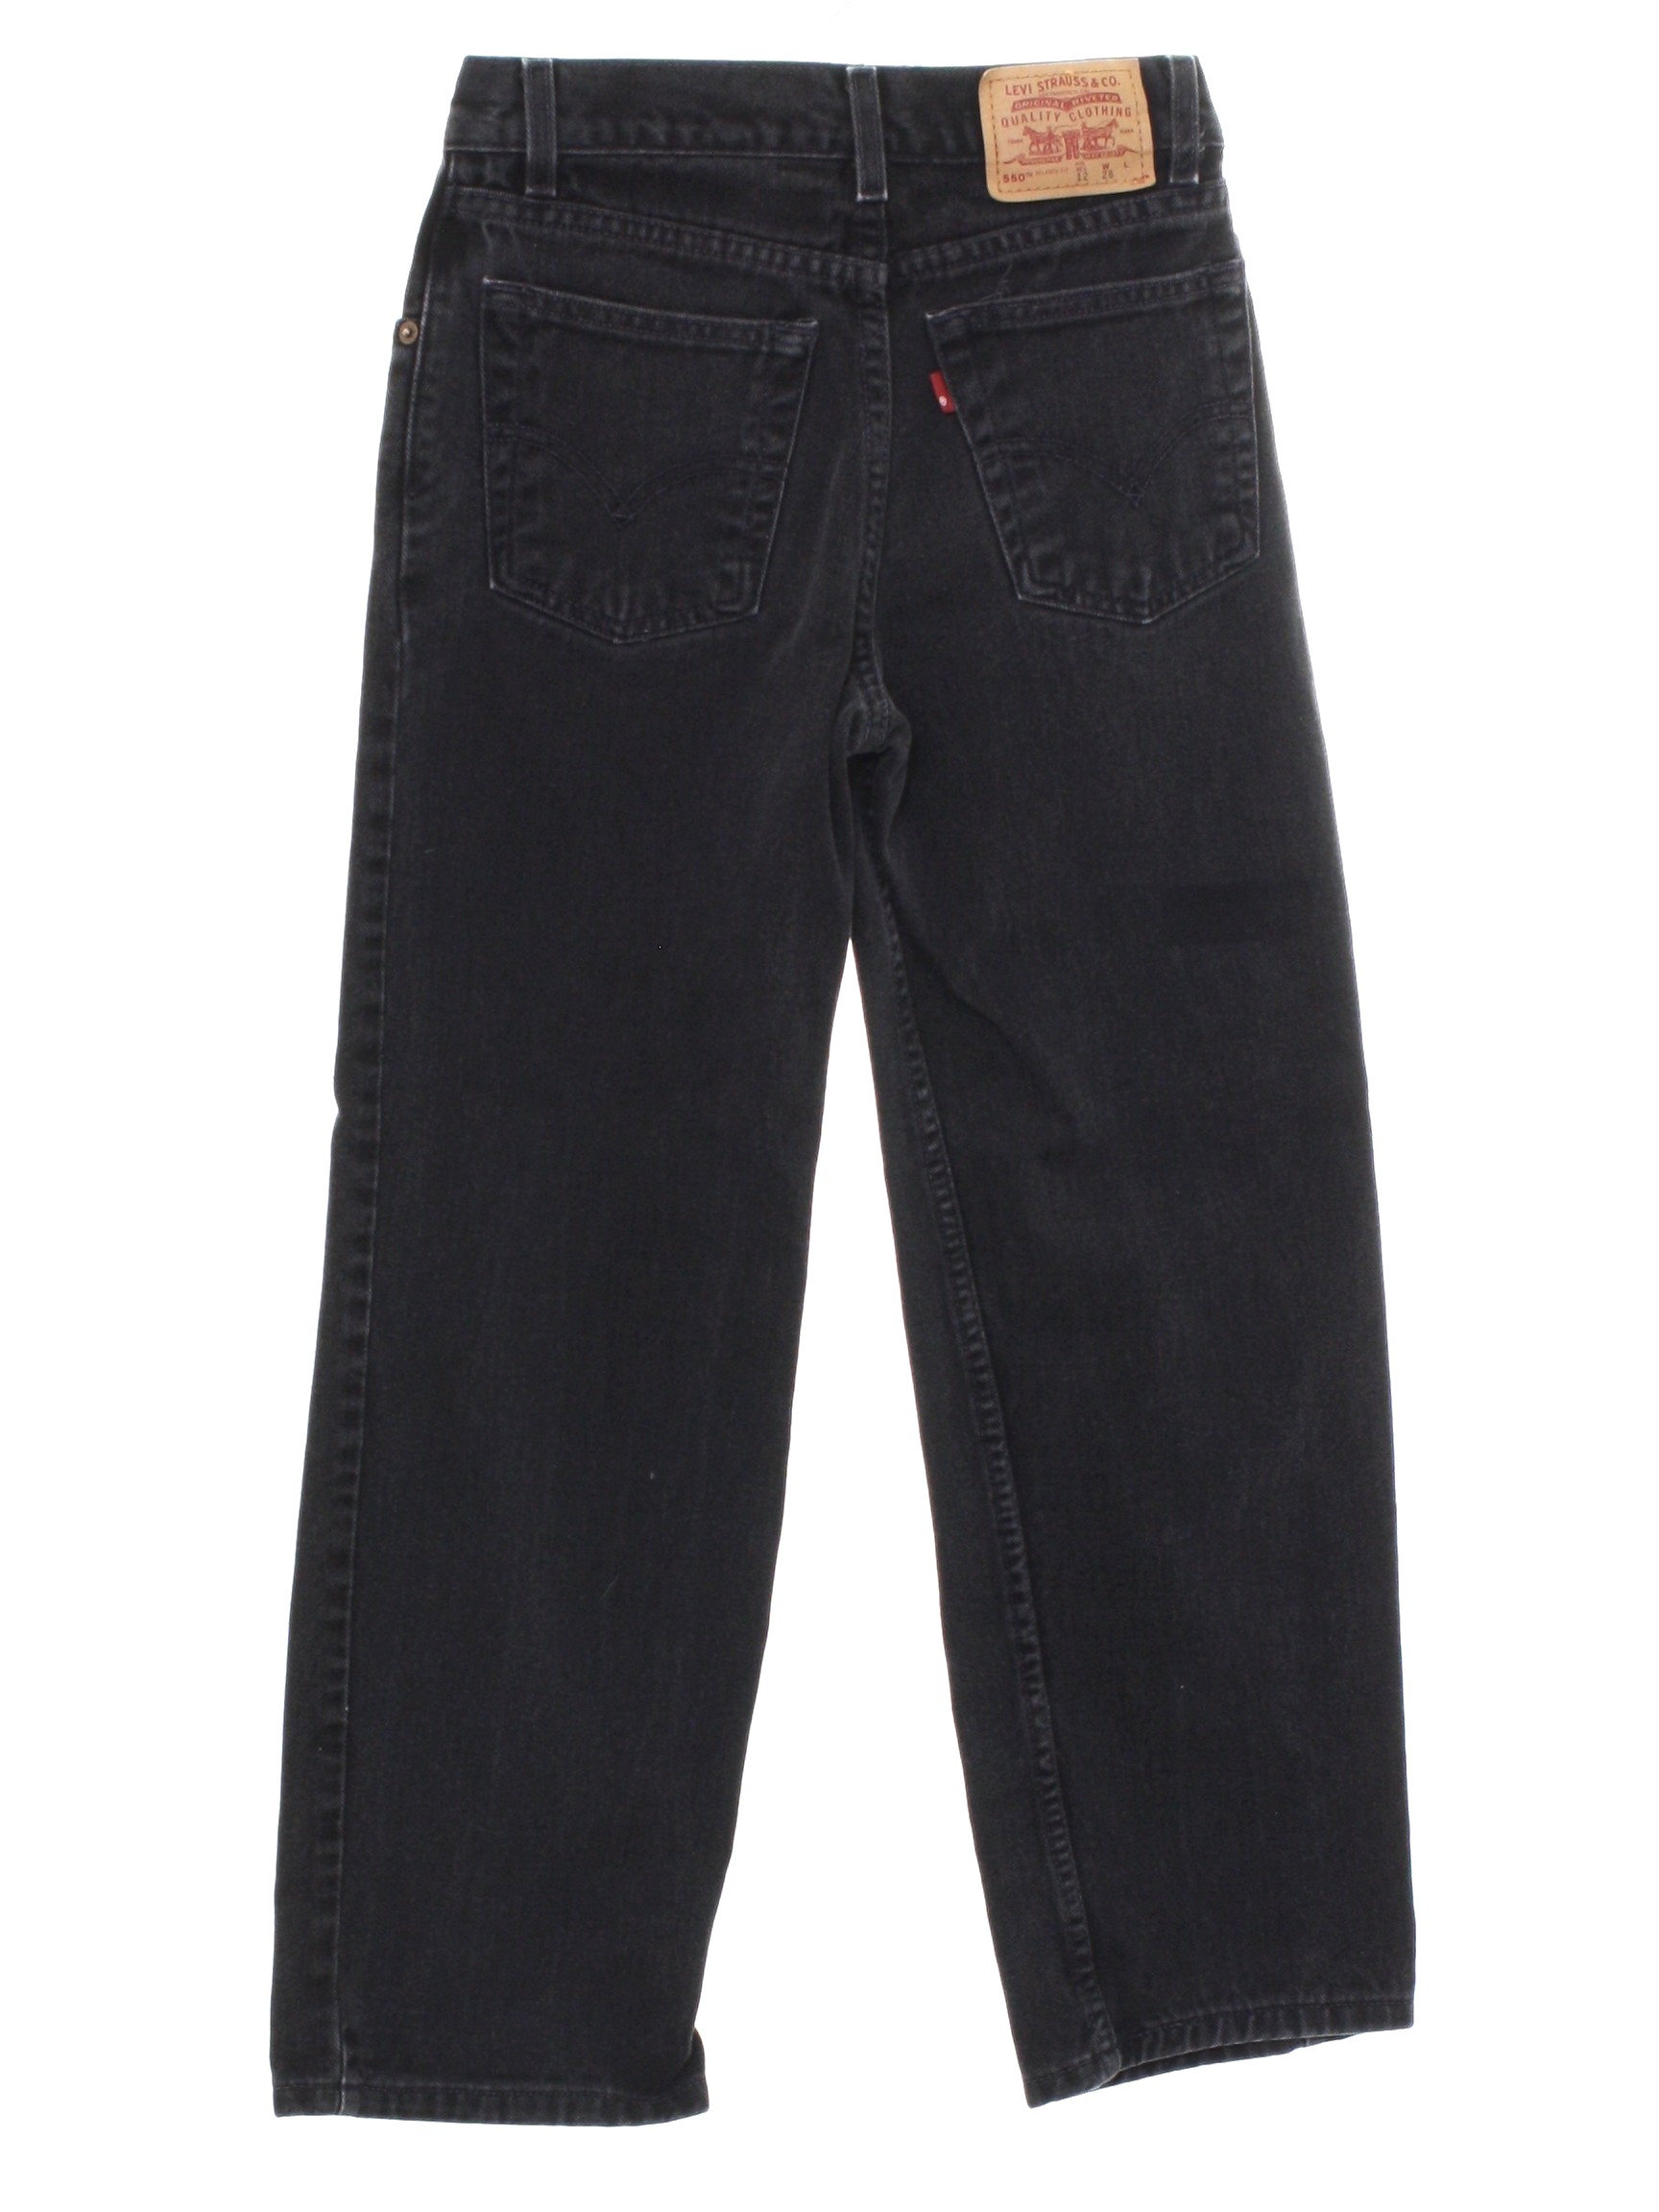 90's Levis 550 Pants: 90s -Levis 550- Womens slightly faded black cotton  denim levis 550 relaxed straight leg denim jeans pants with zipper fly  closure with snap. Five pocket style - front